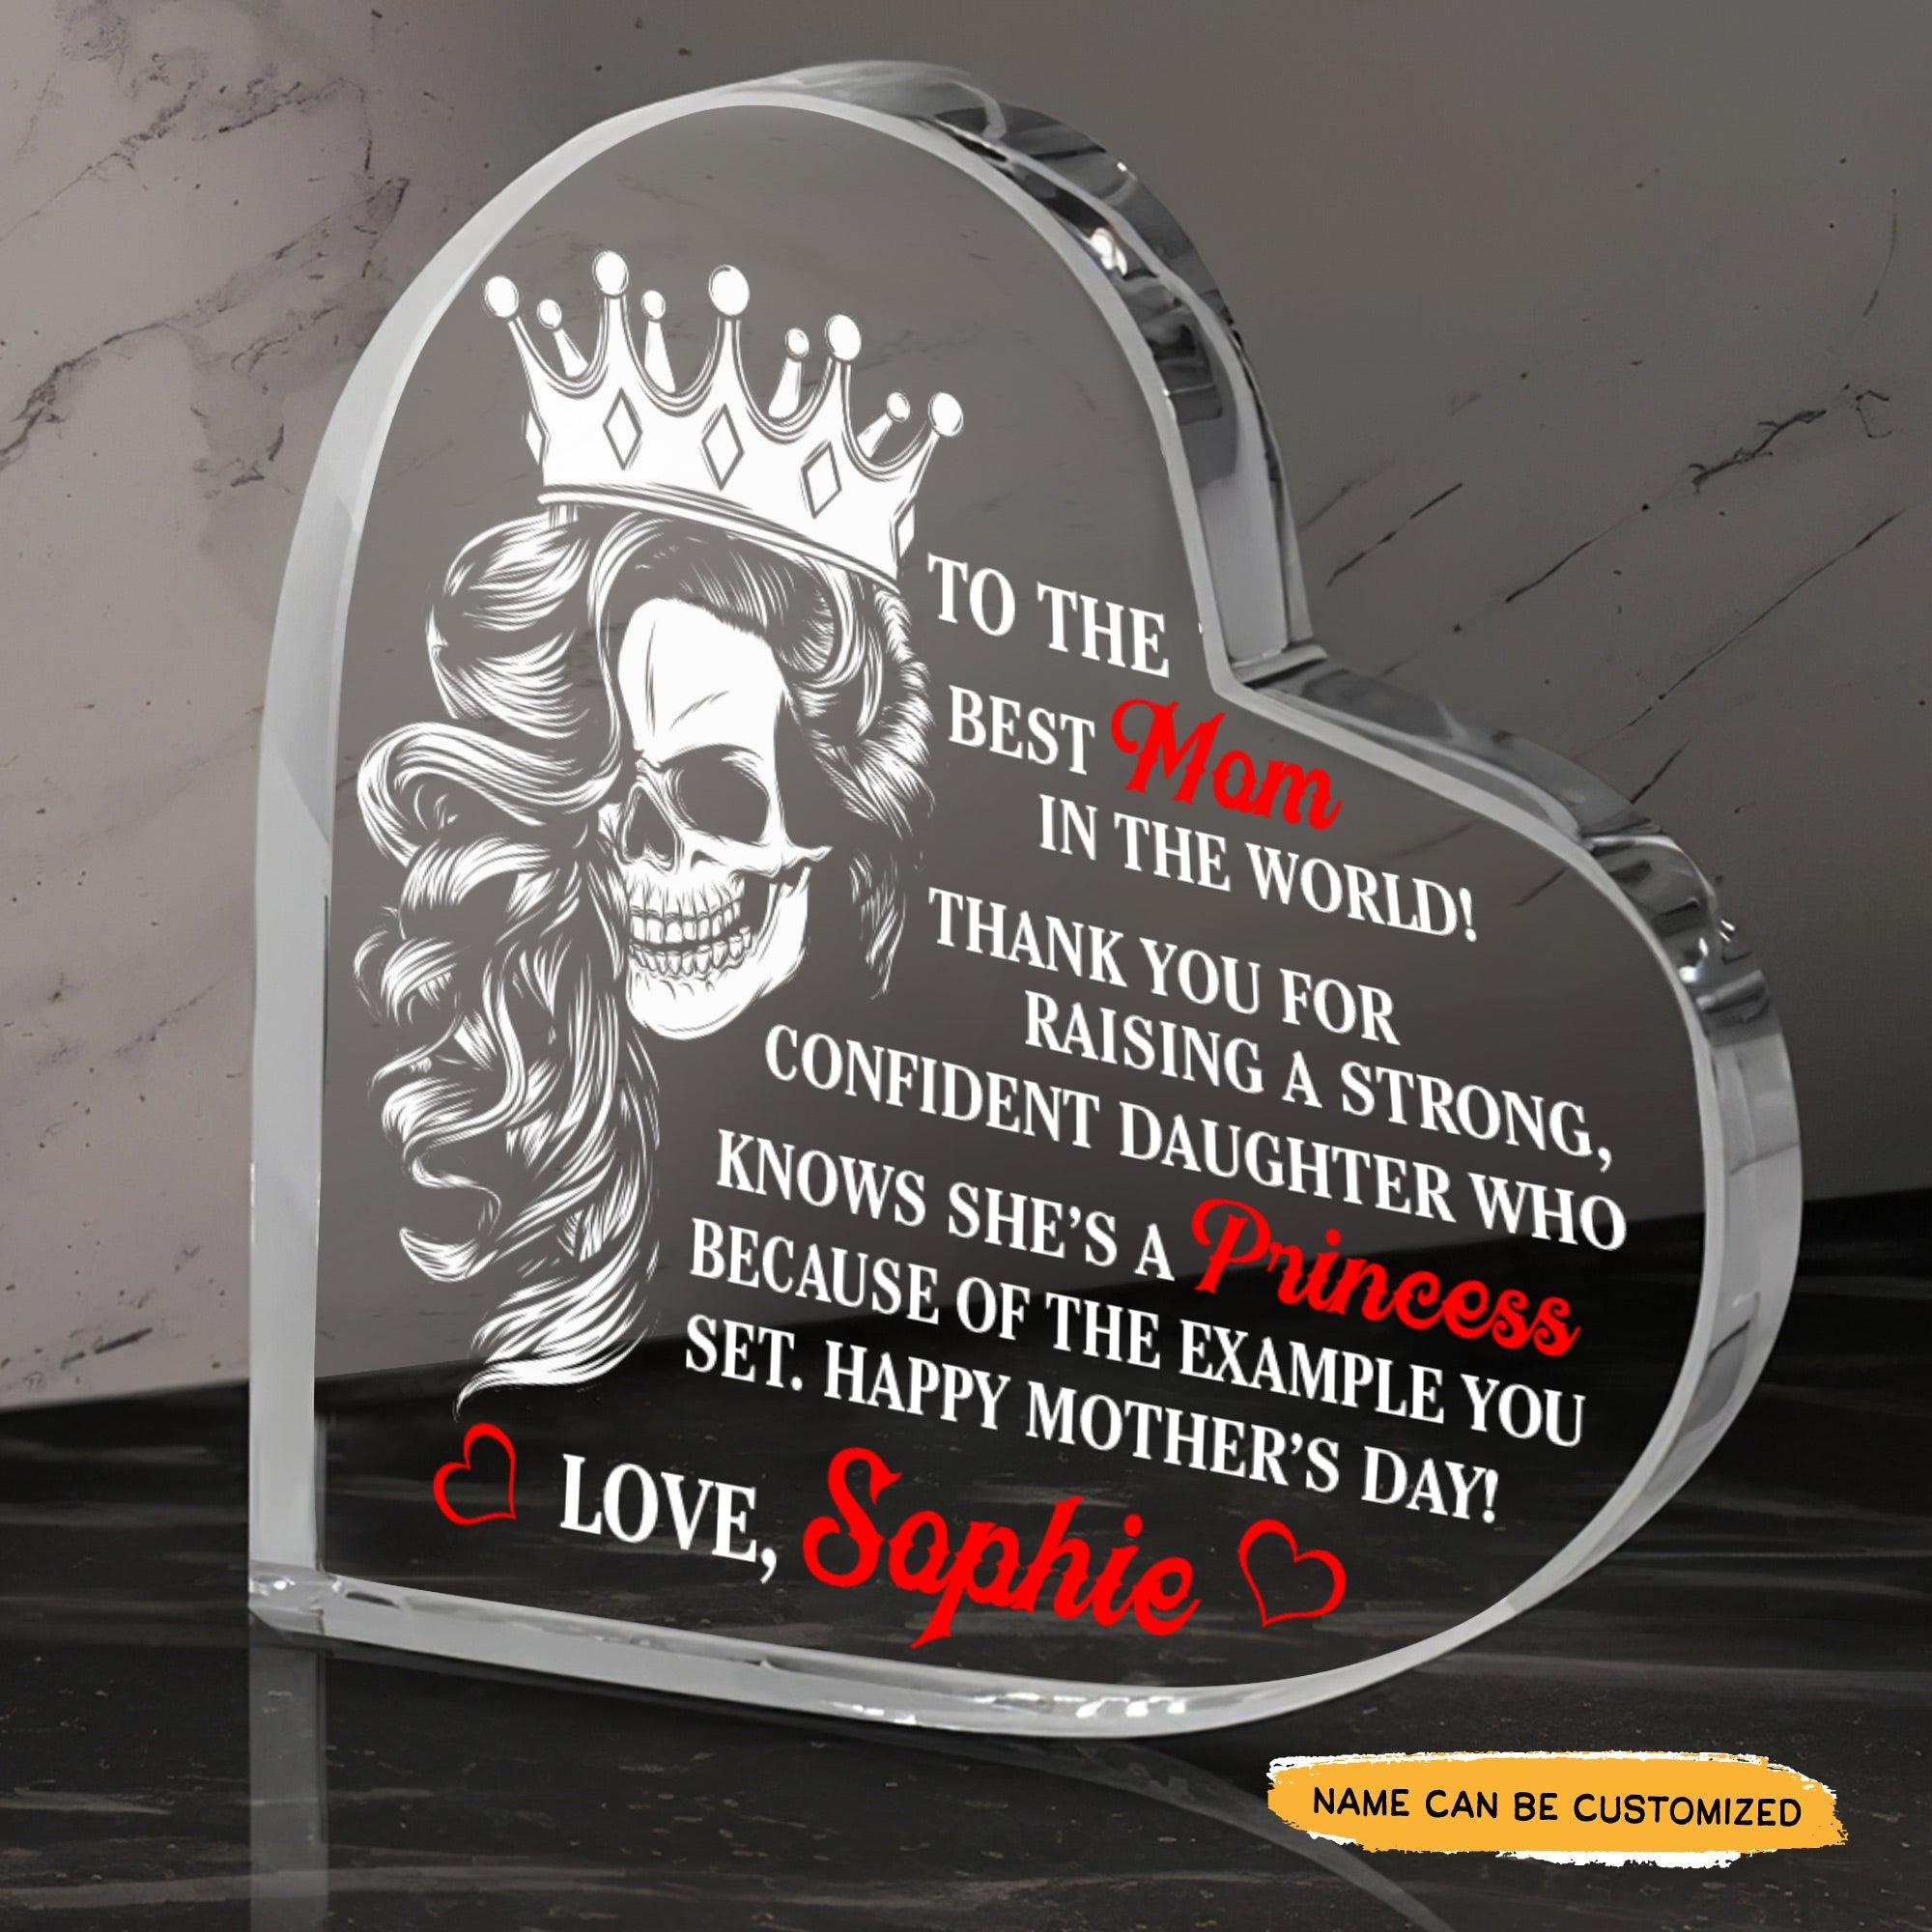 To The Best Mom - Customized Gifts Couple Crystal Heart - Wonder Skull